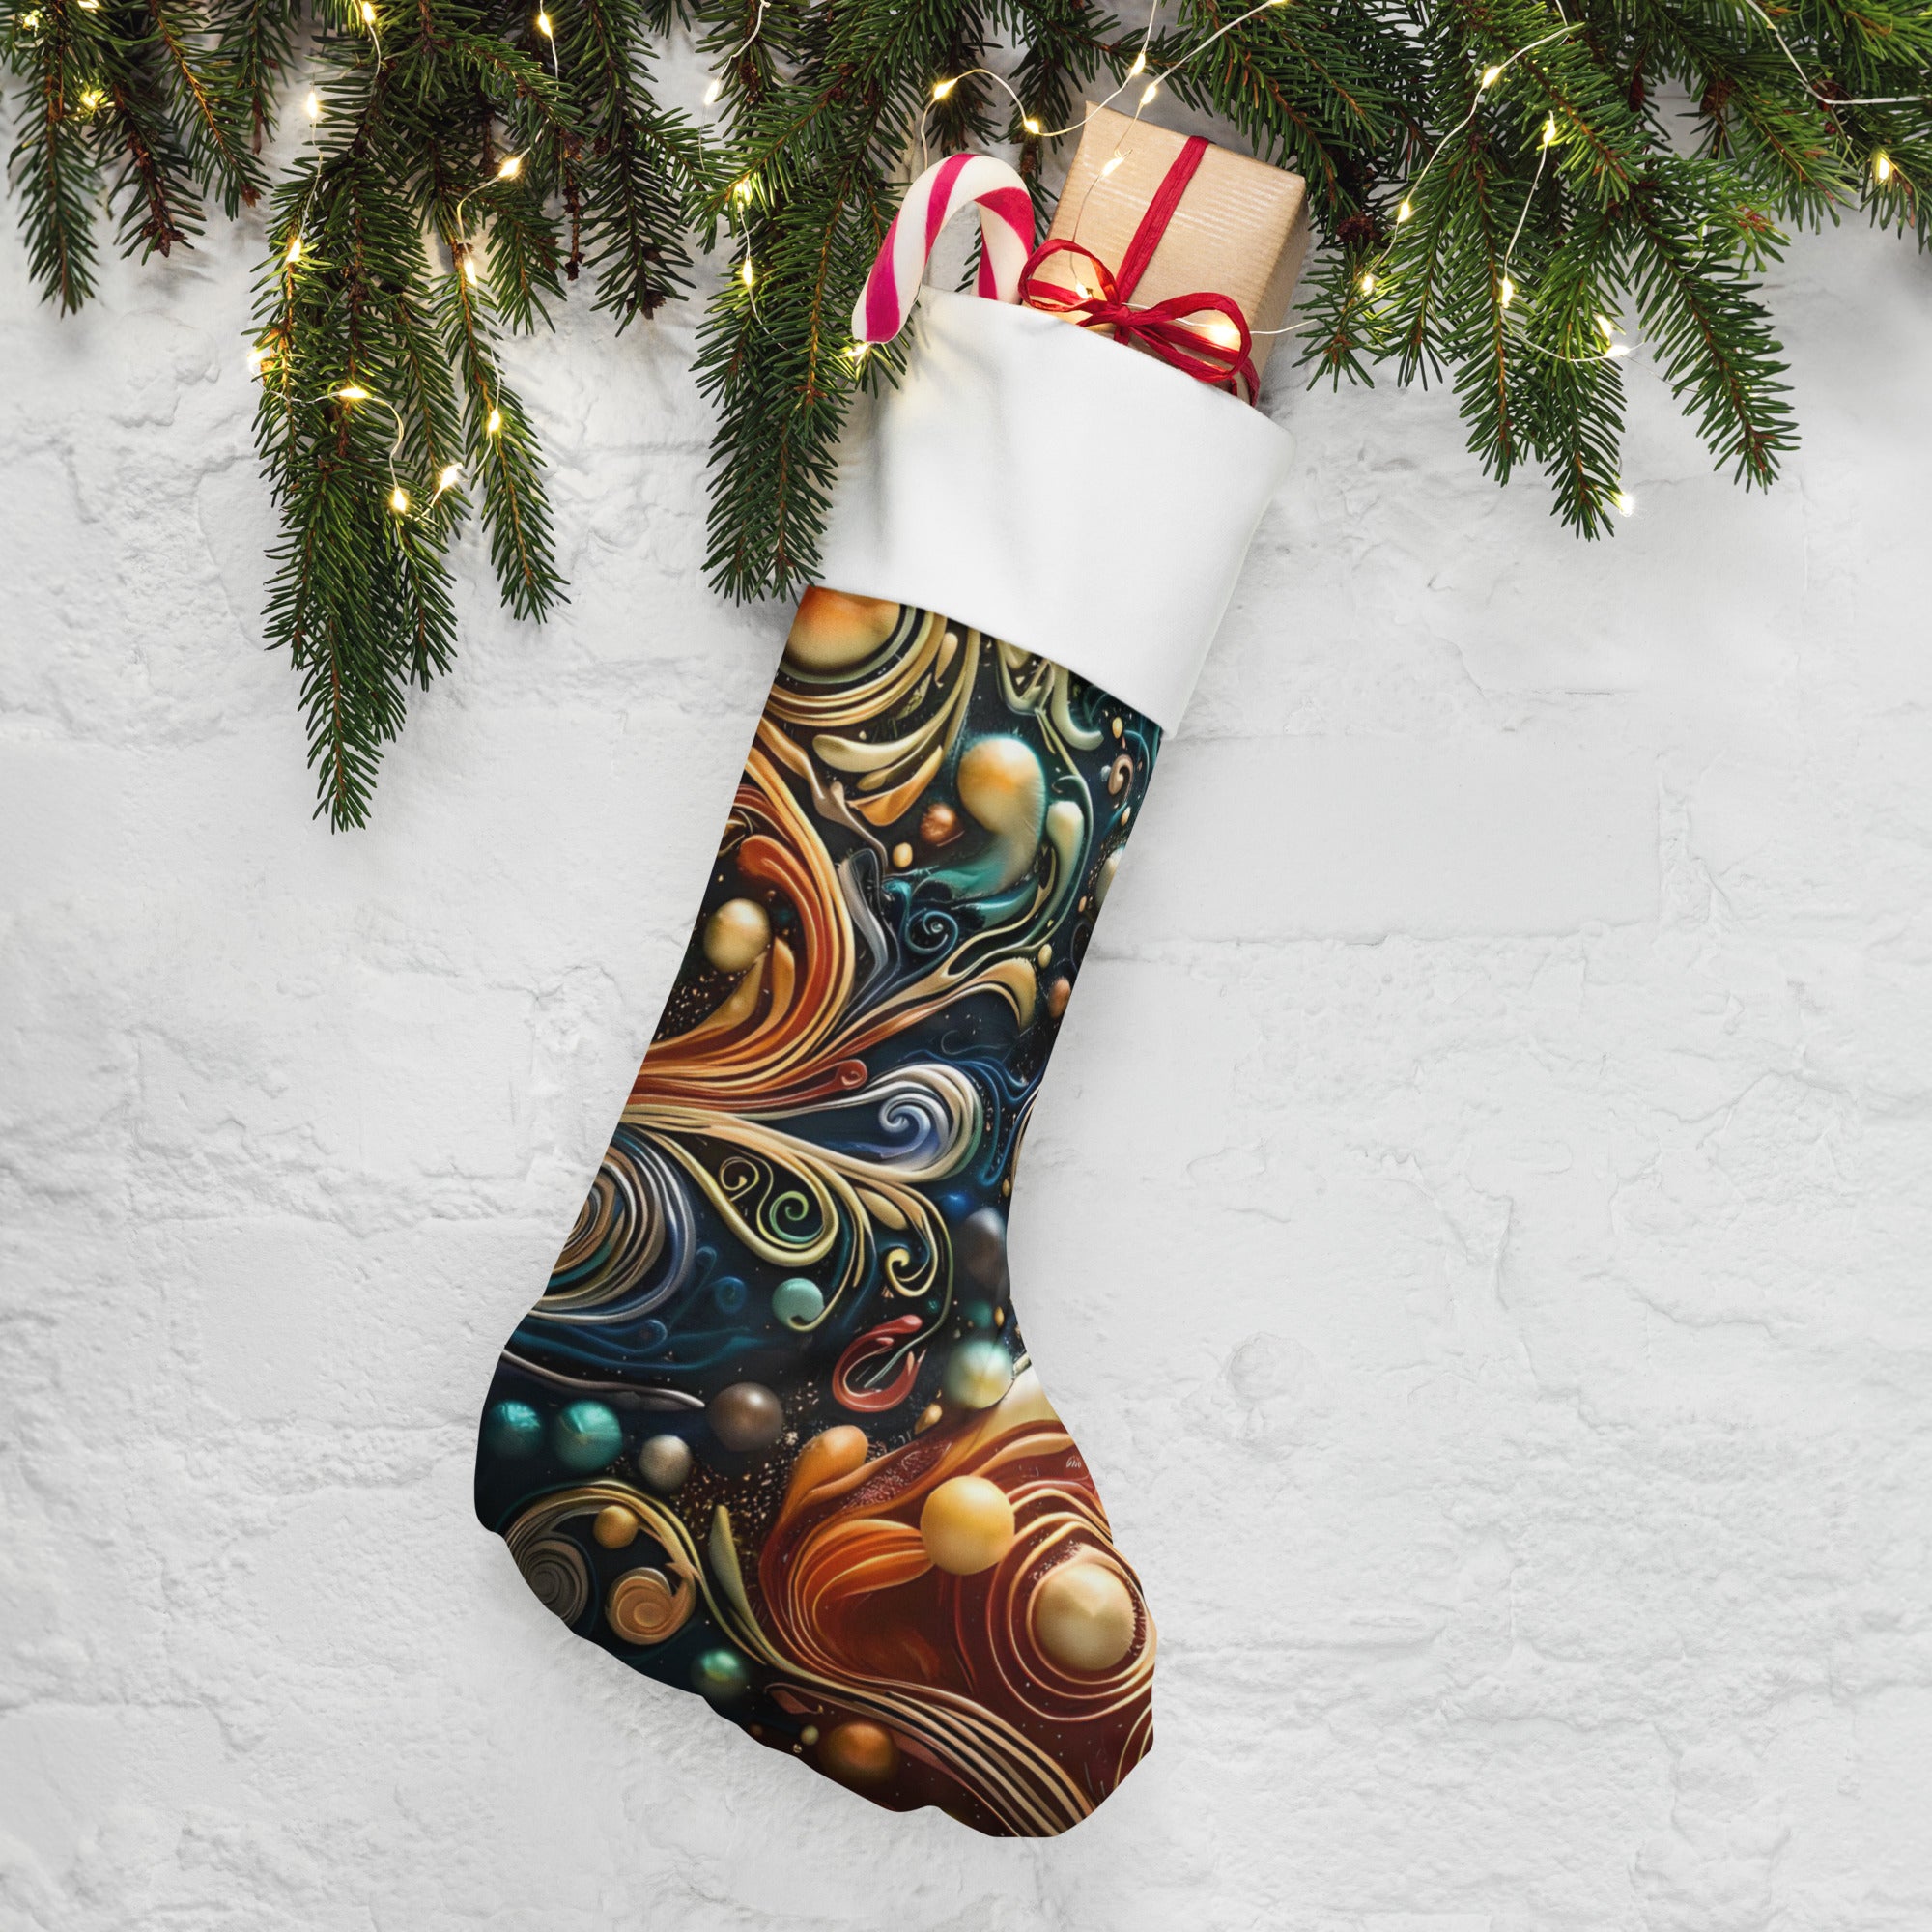 Merry Mantel Mates - Christmas Stockings (one-sided, with cuff)